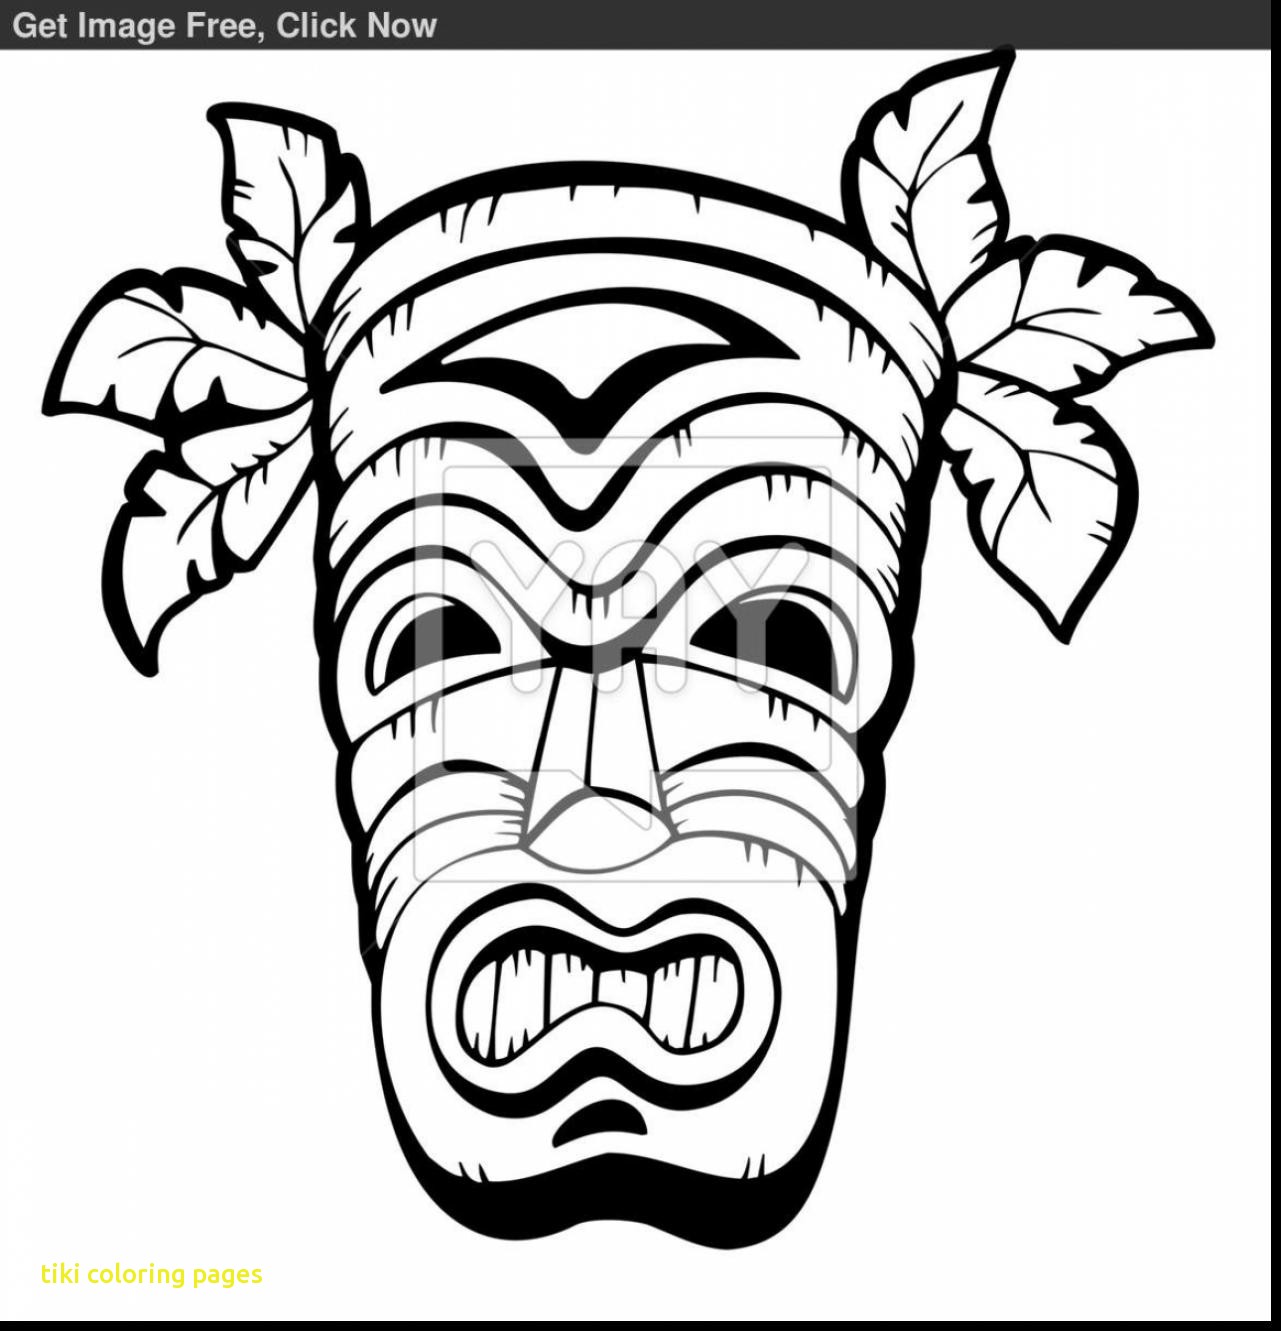 tiki-mask-coloring-pages-at-getcolorings-free-printable-colorings-pages-to-print-and-color